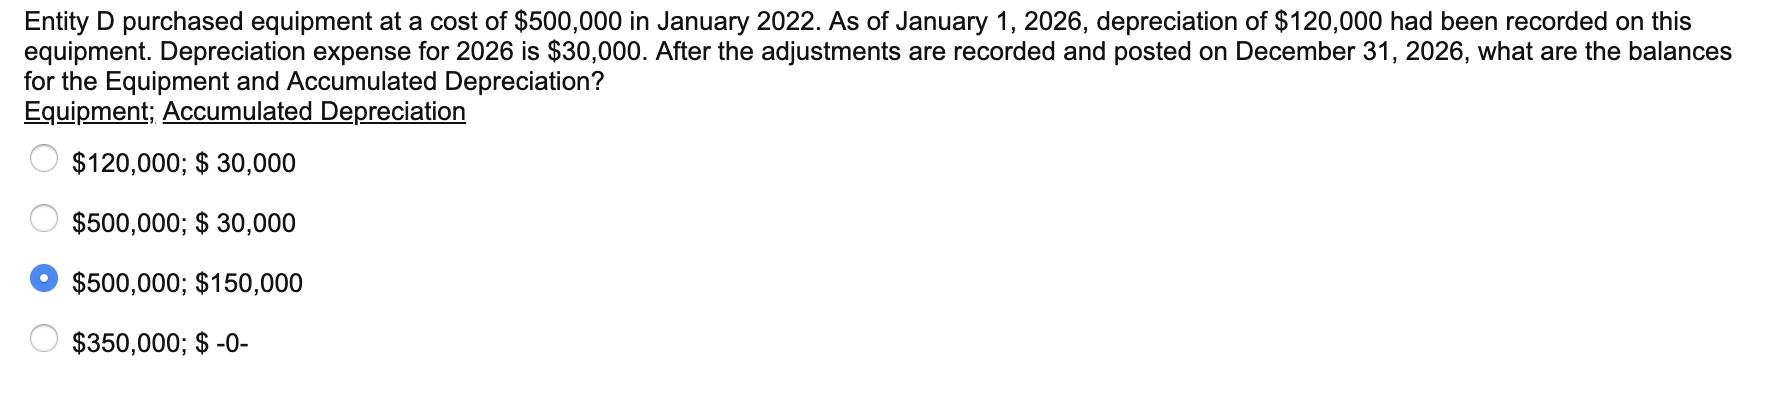 Entity D purchased equipment at a cost of $500,000 in January 2022. As of January 1, 2026, depreciation of $120,000 had been